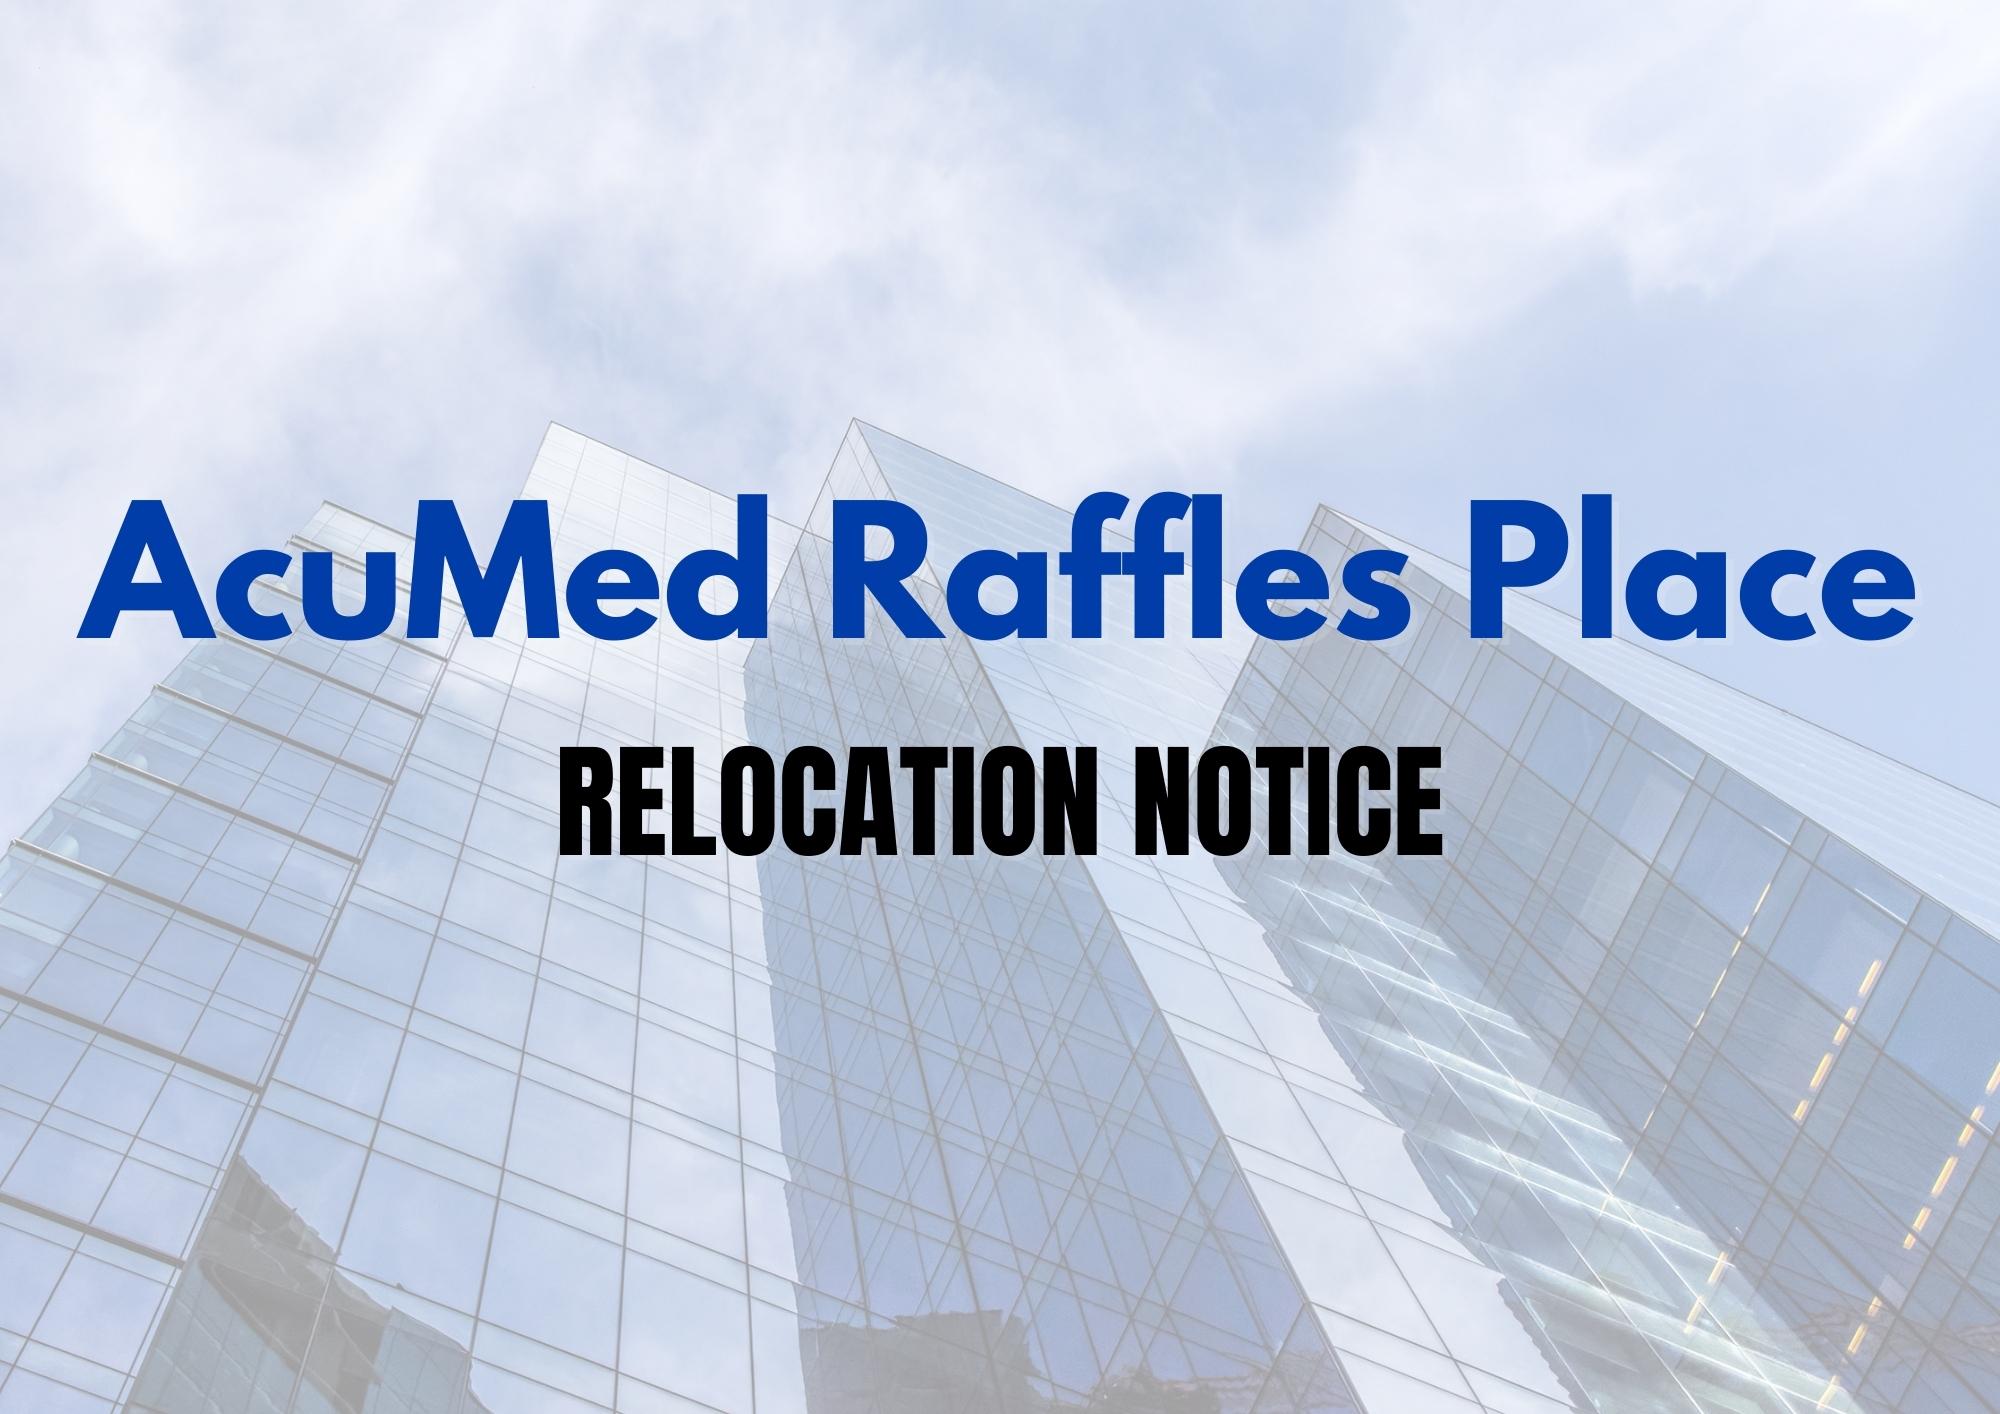 AcuMed (Raffles Place) Relocation Notice